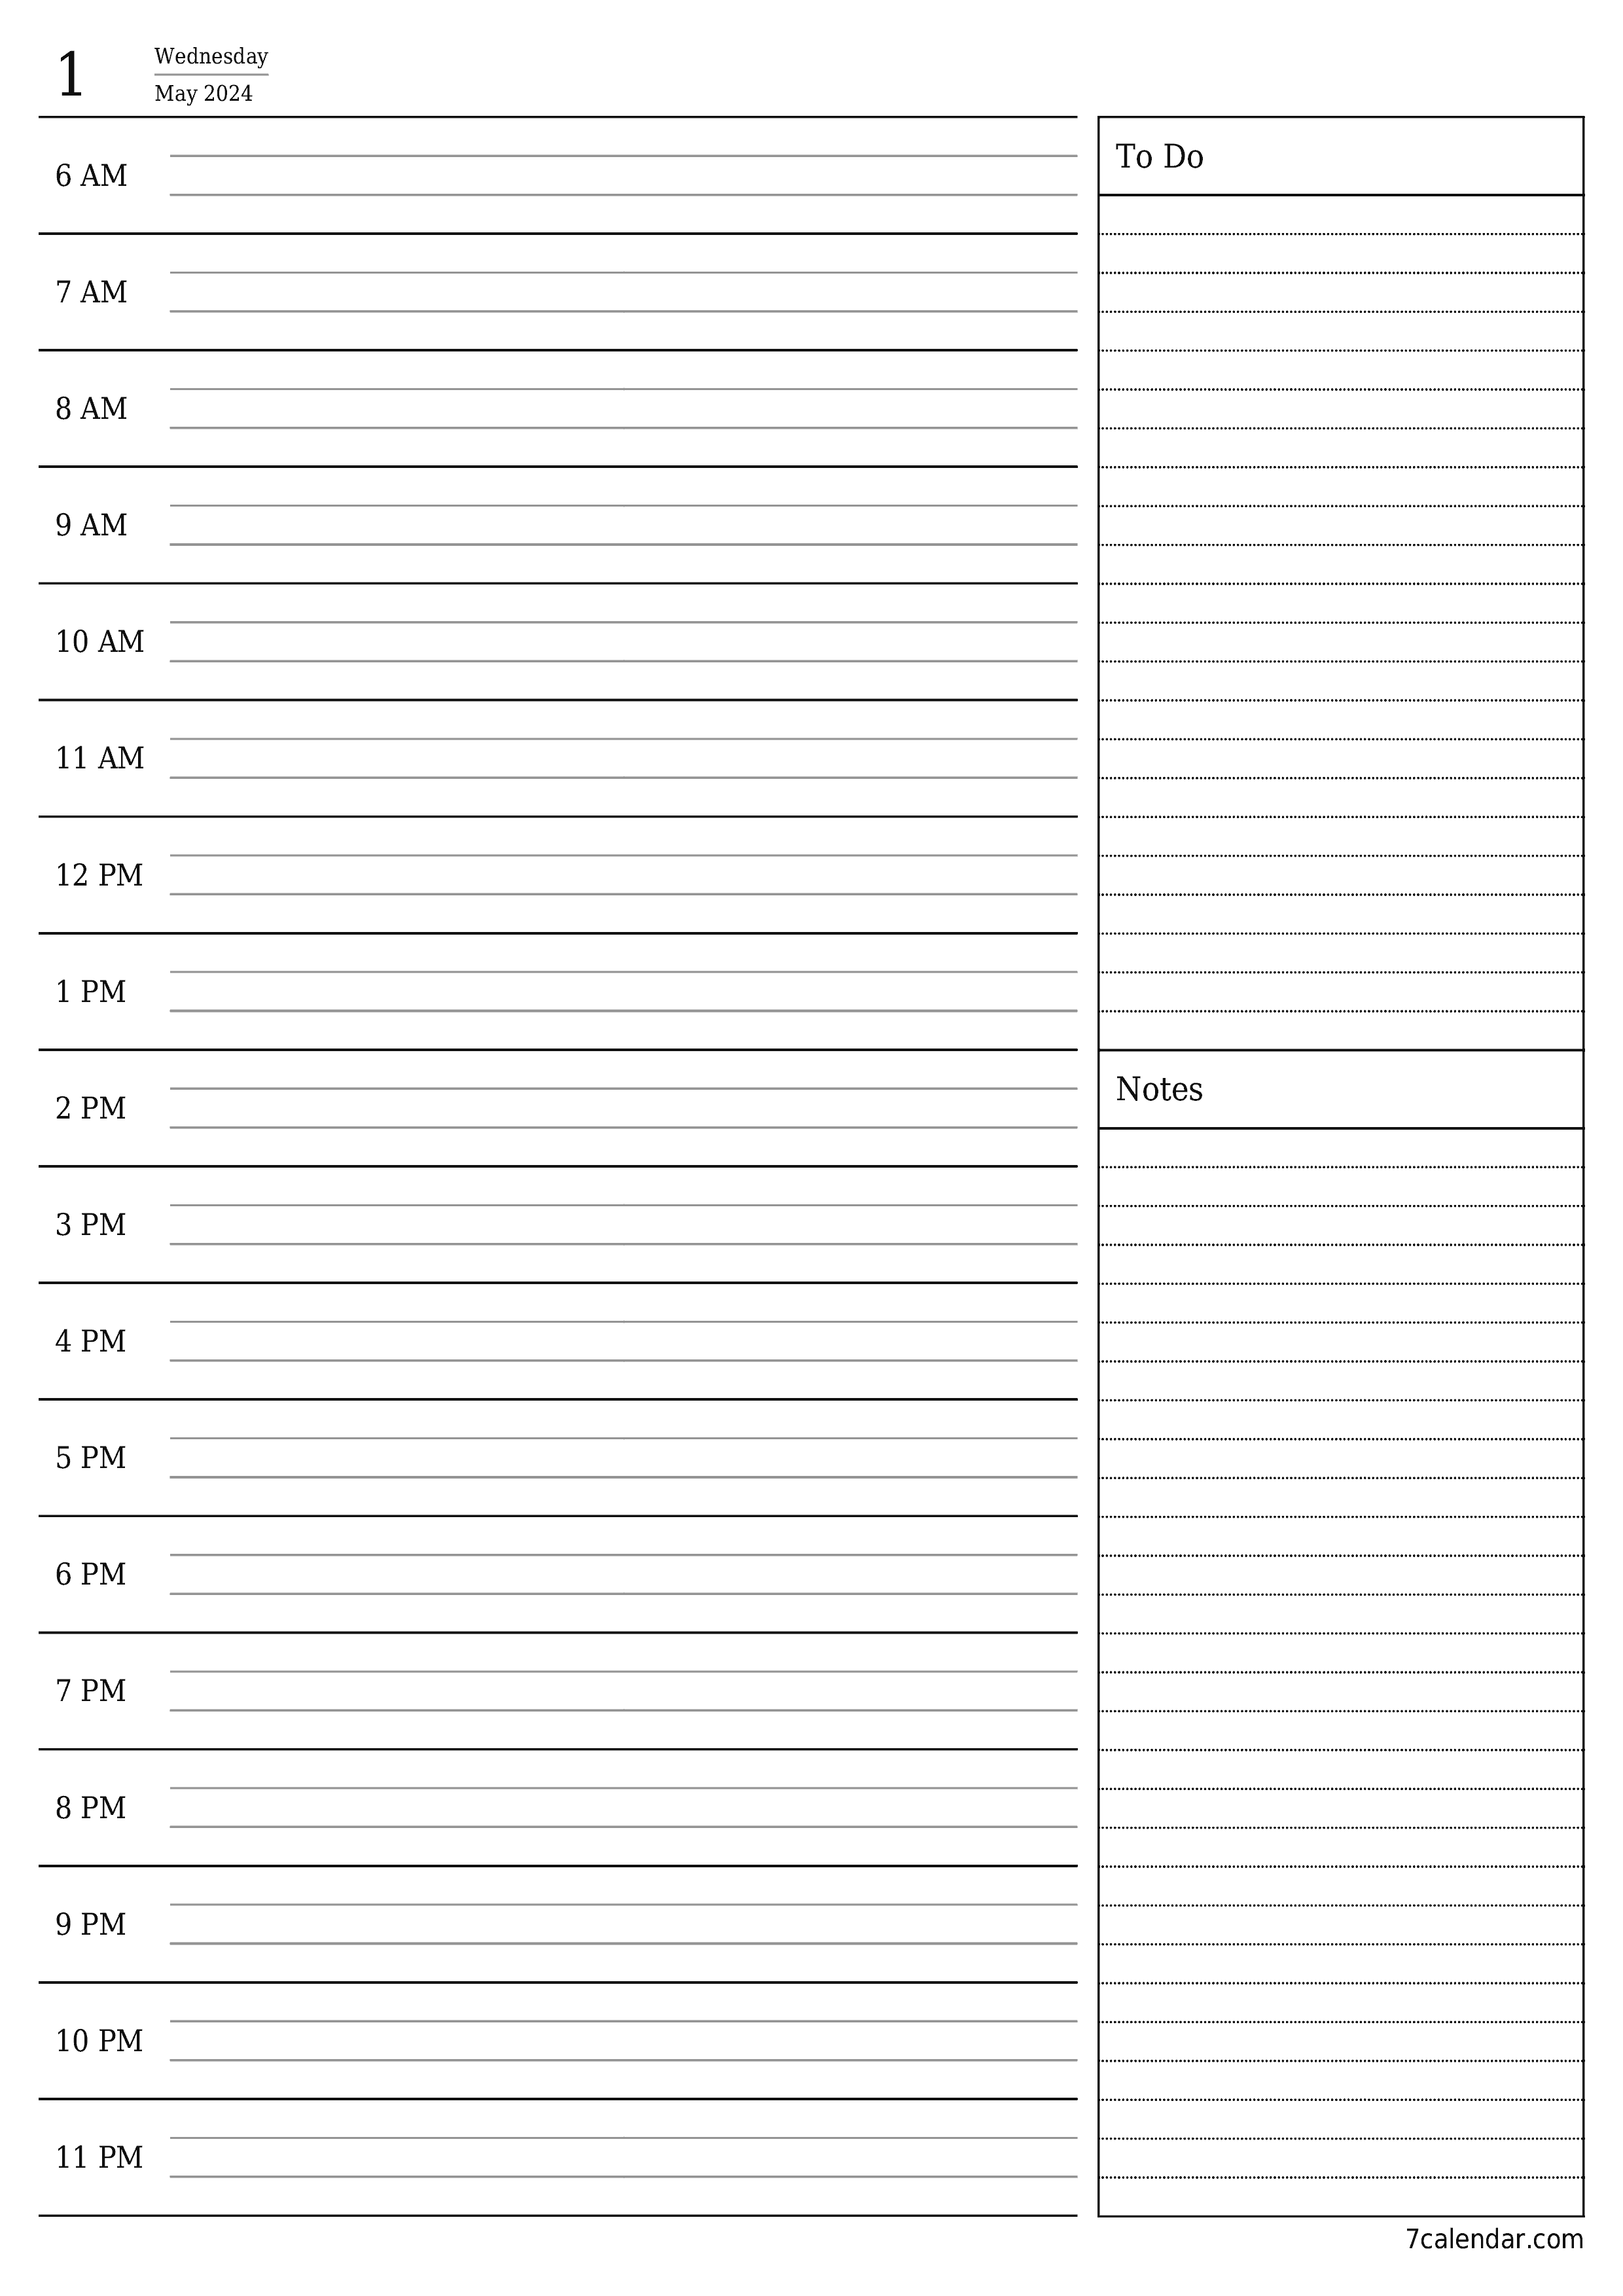 Blank daily printable calendar and planner for day May 2024 with notes, save and print to PDF PNG English